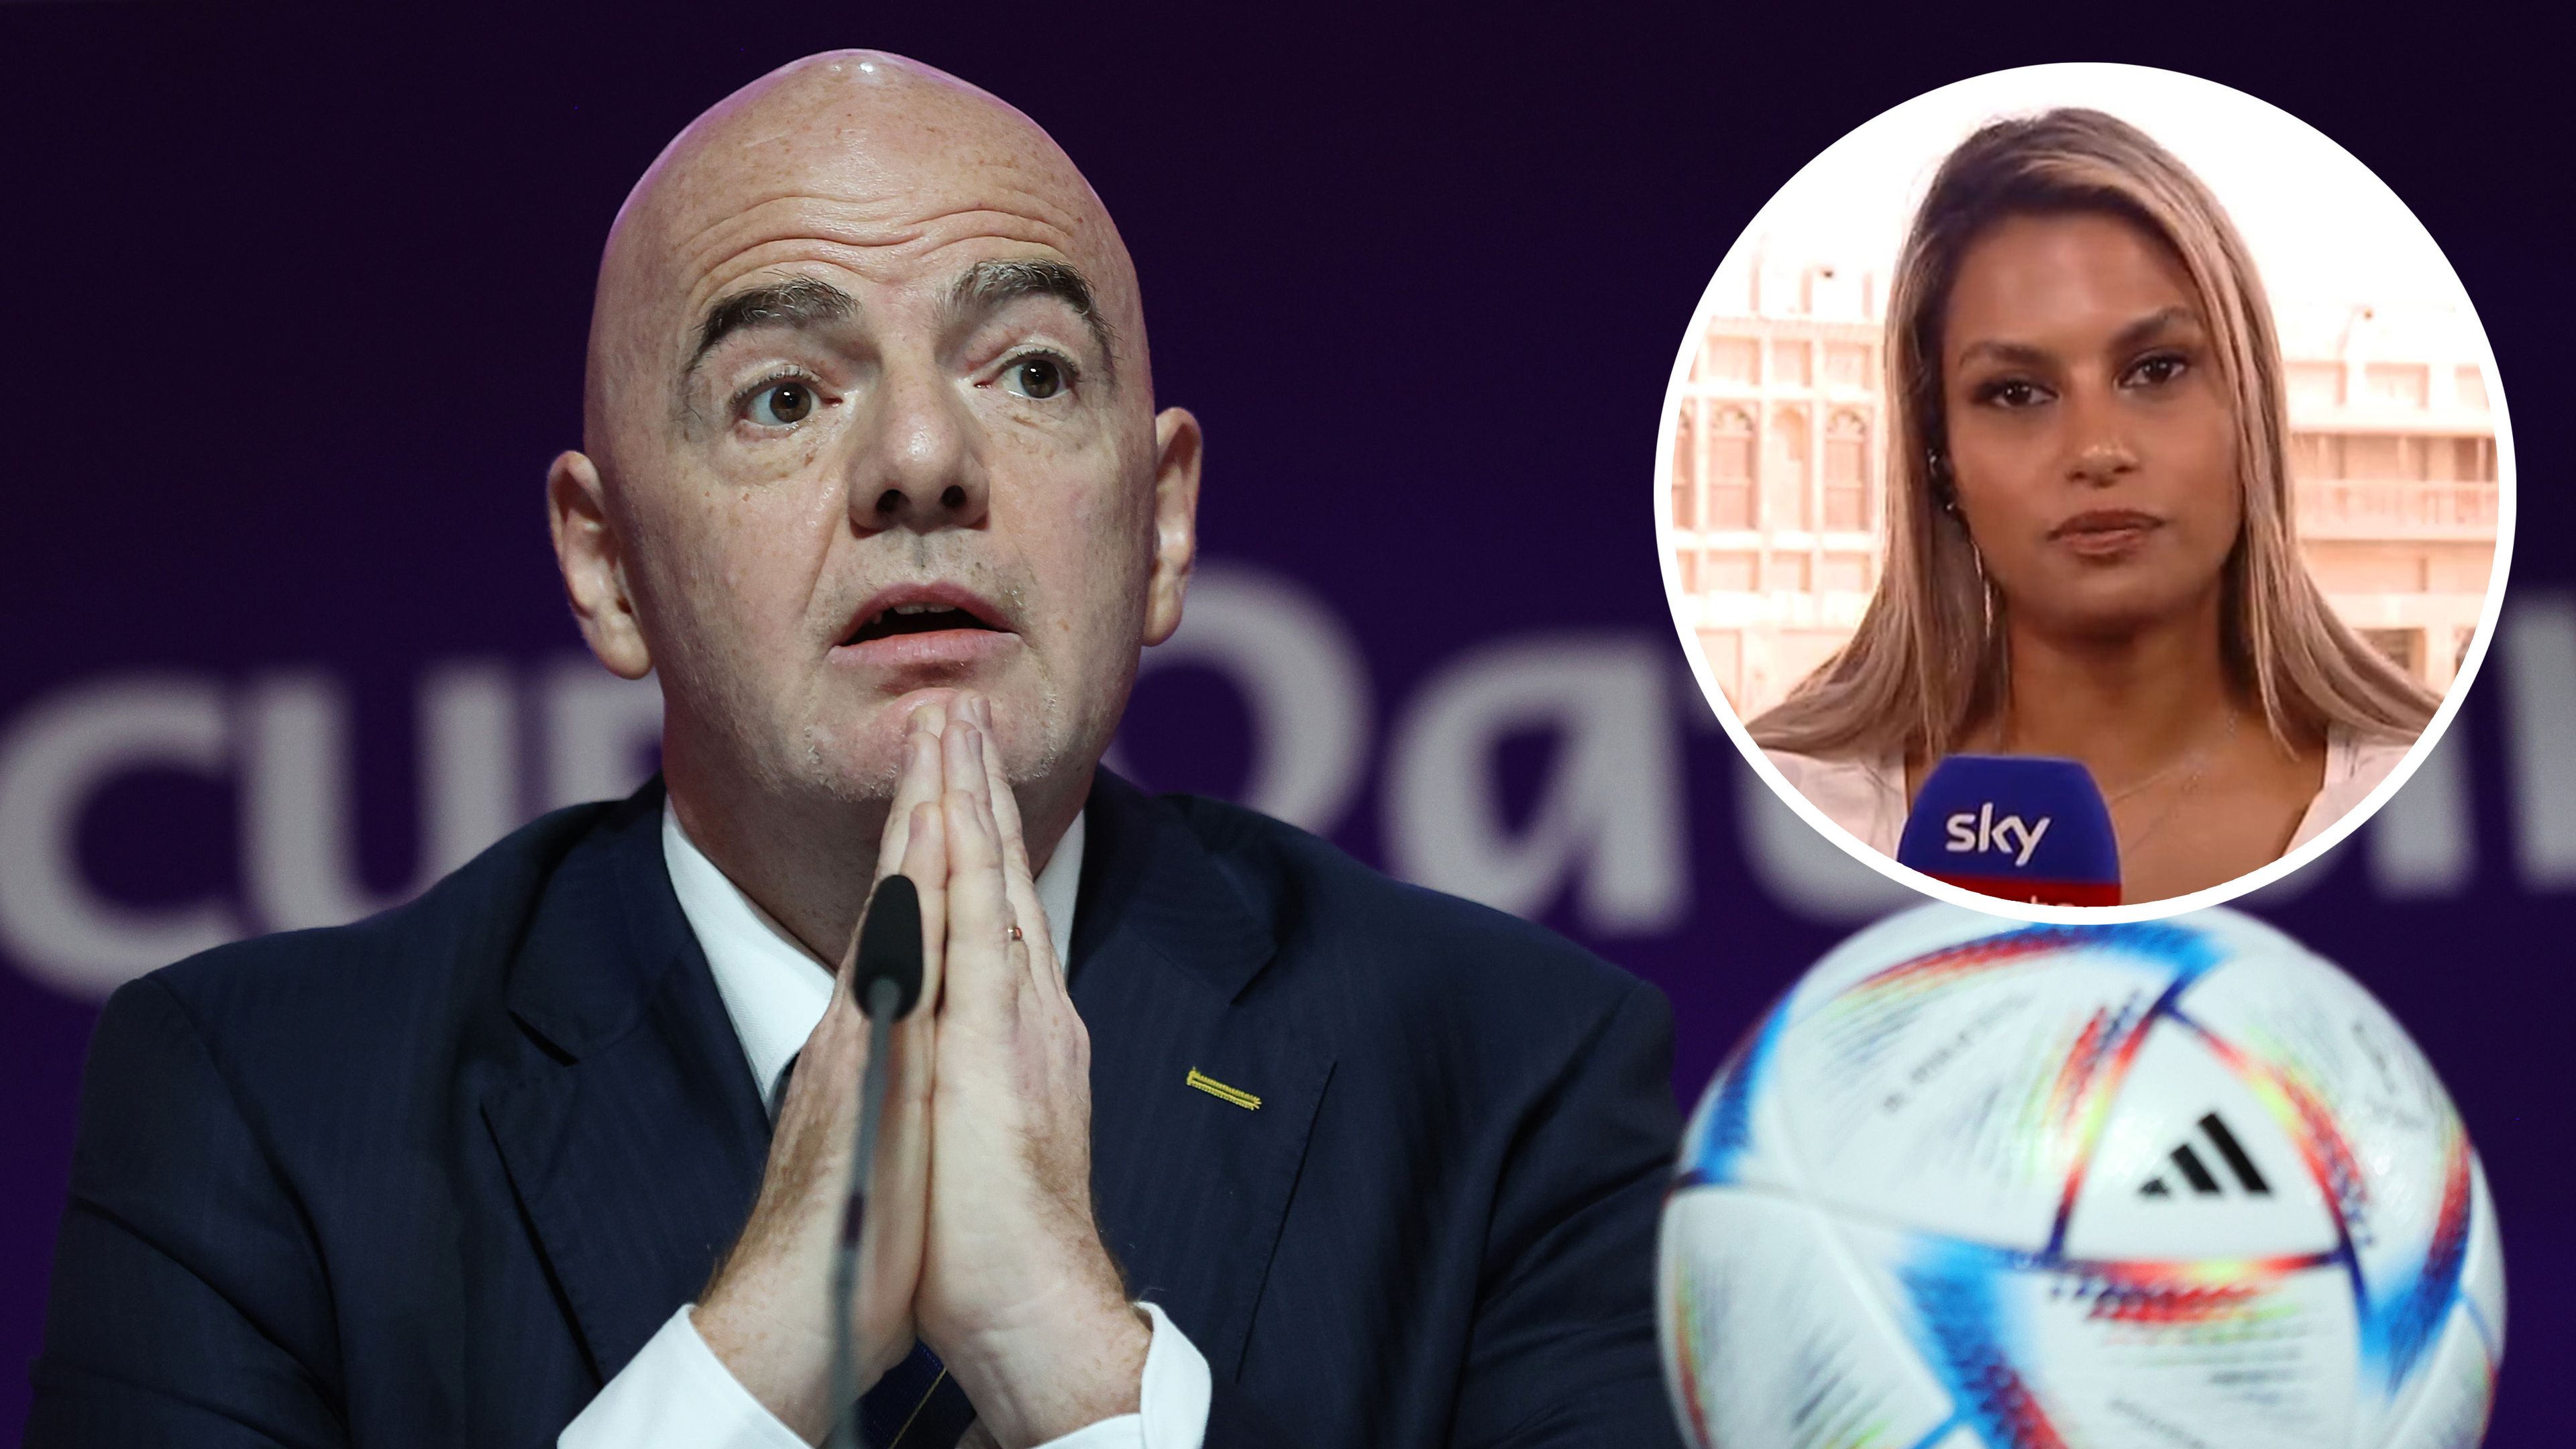 FIFA President Gianni Infantino was grilled by Sky Sports reporter Melissa Reddy for his pre-World Cup speech.